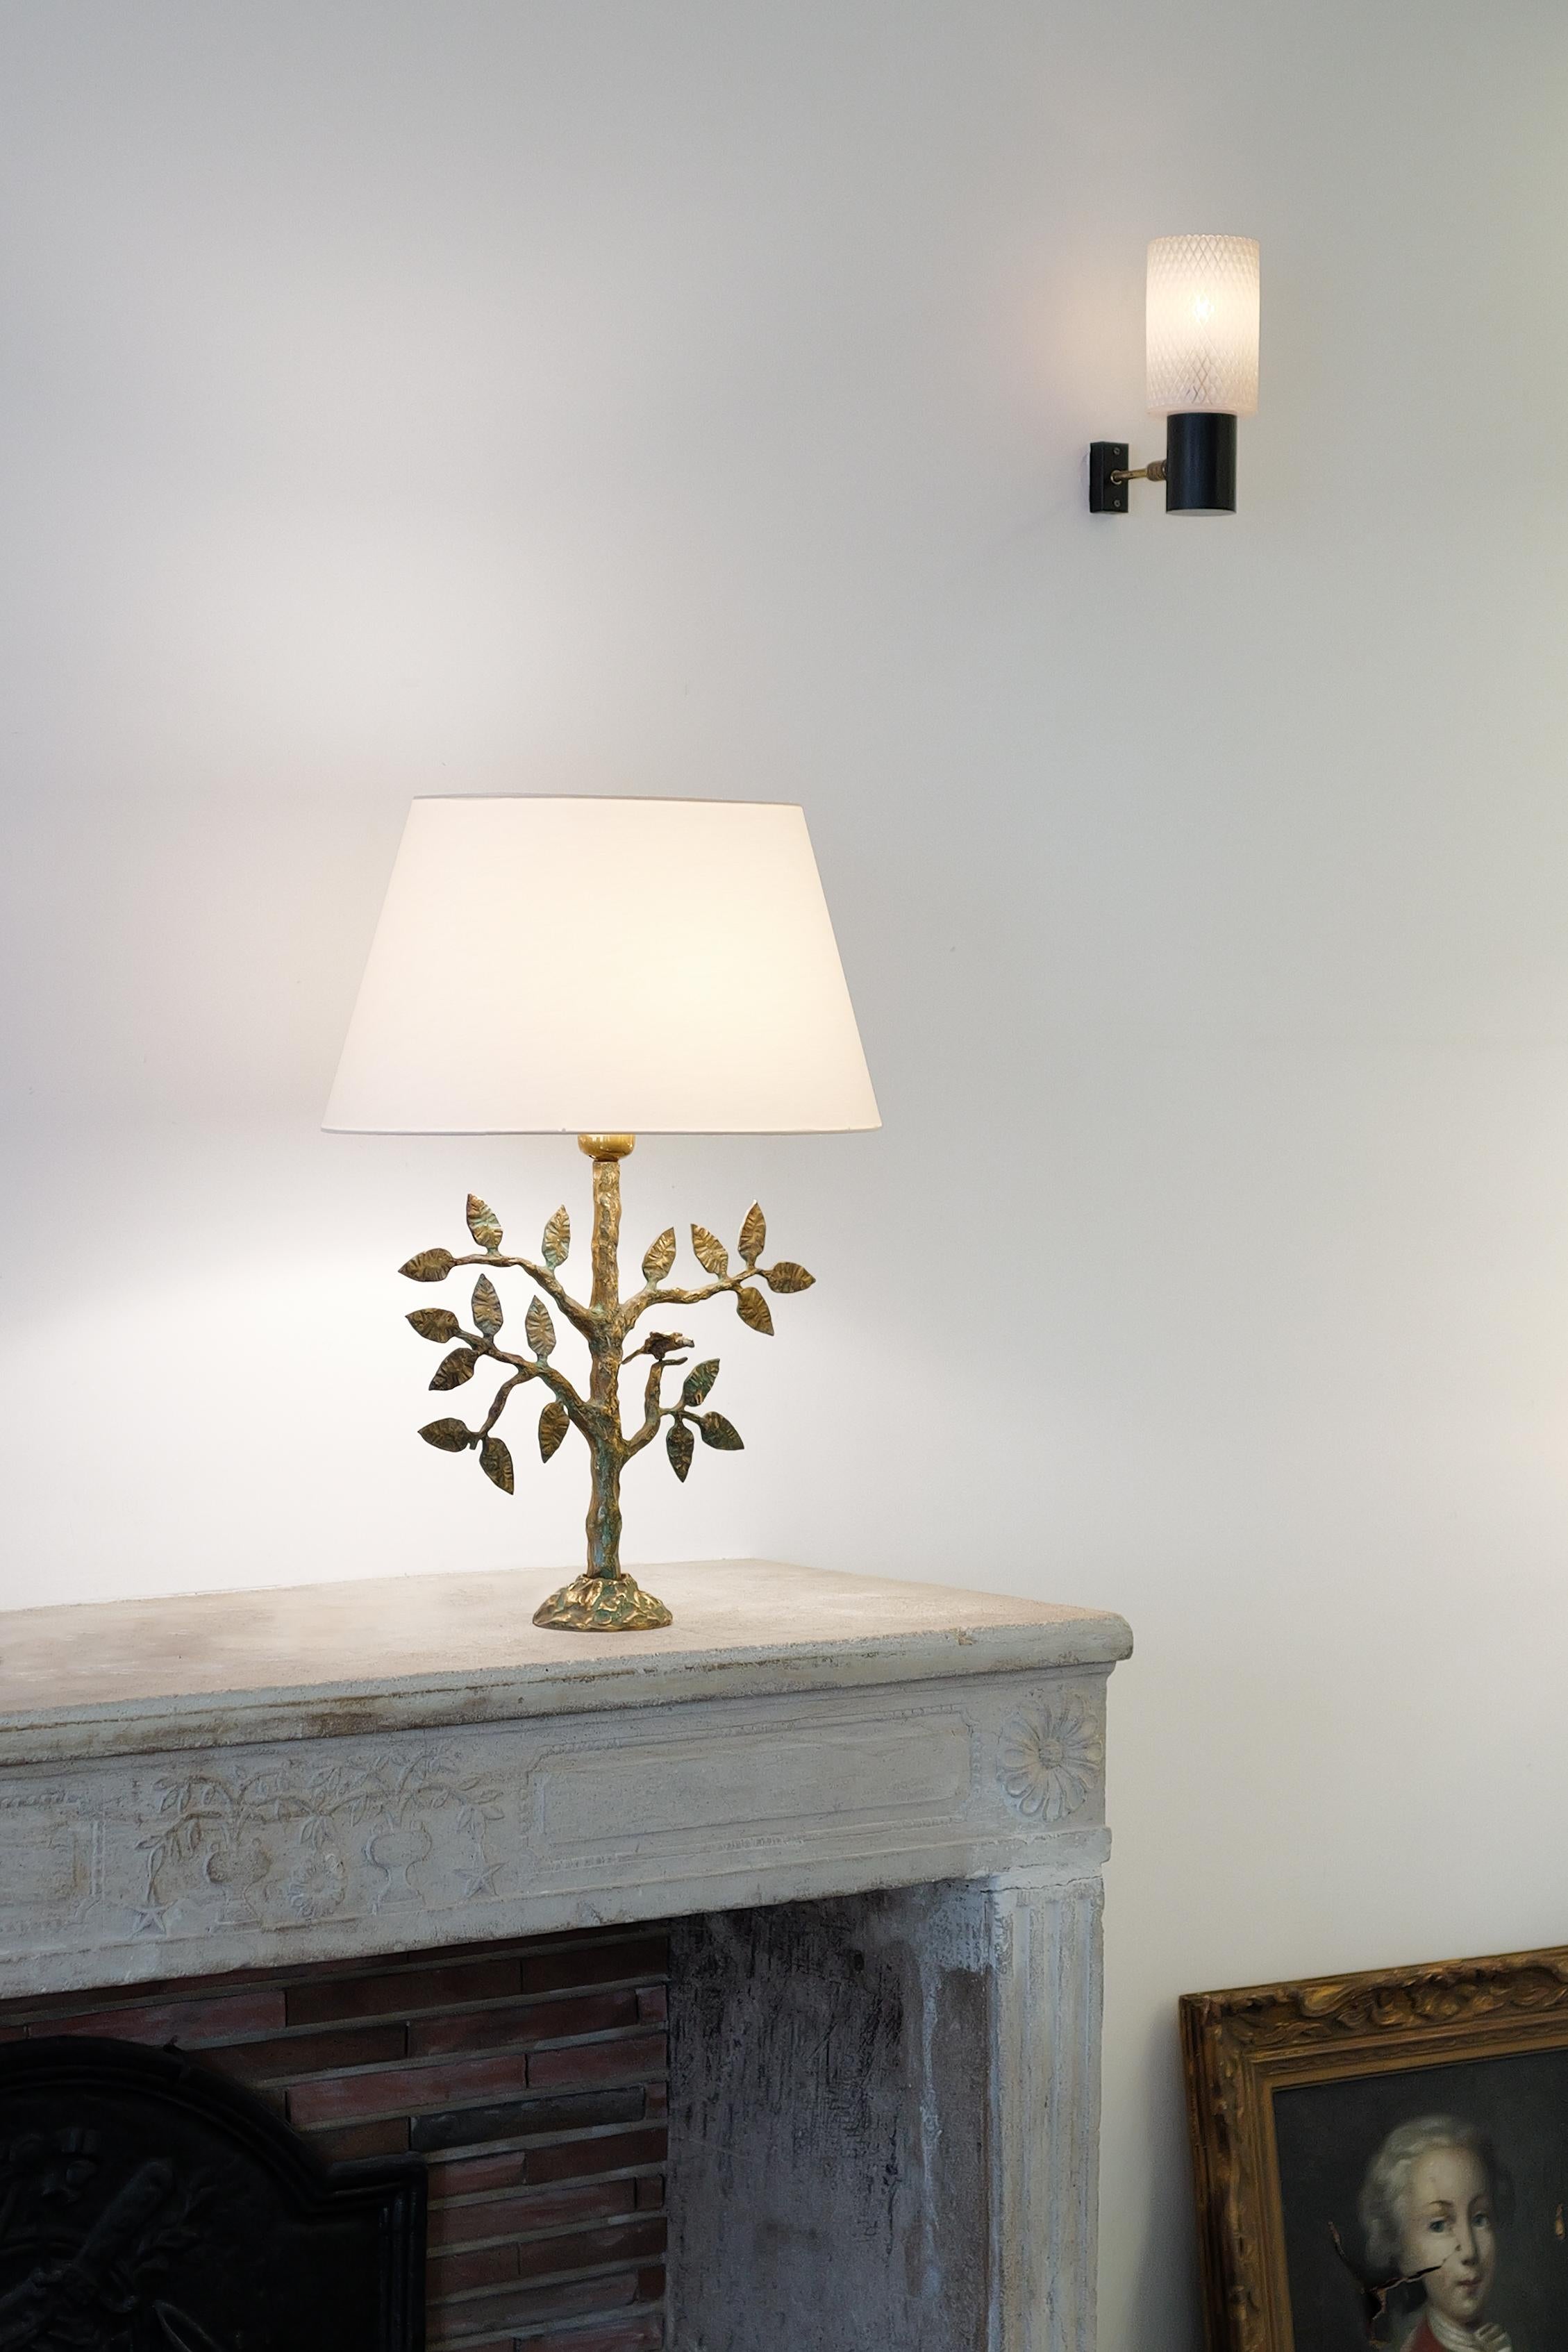 Table lamp from the 50 s or 60s in gilded bronze in the style of the creations of Diego or Alberto Giacometti. No certain attribution so I indicate that it is in the spirit of their creations.
.
The bronze has a golden patina with a superb green